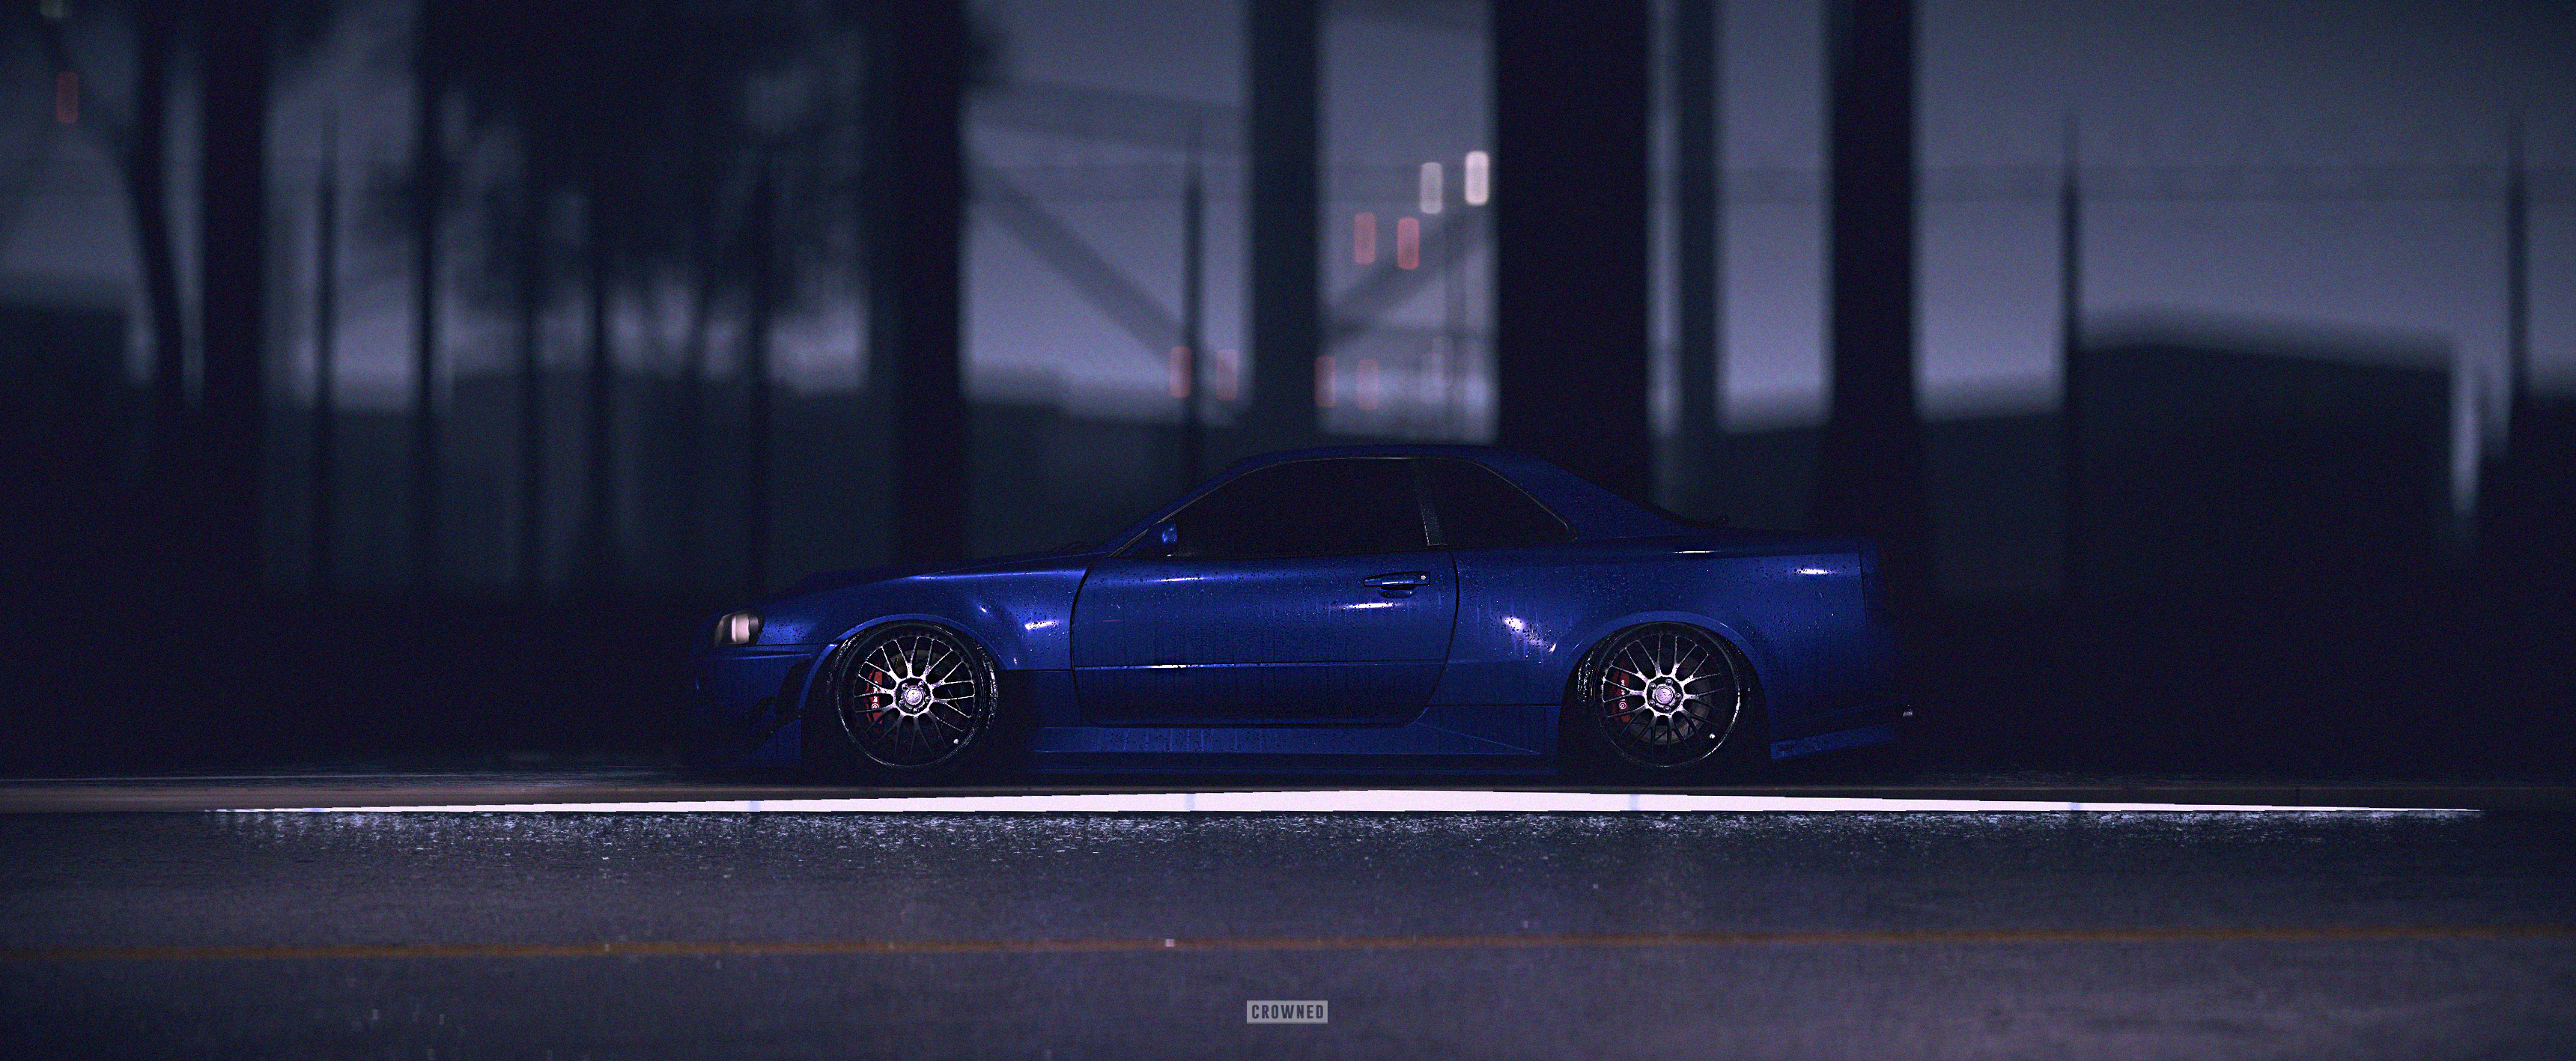 CROWNED Need For Speed Nissan Skyline GT R R34 3440x1417